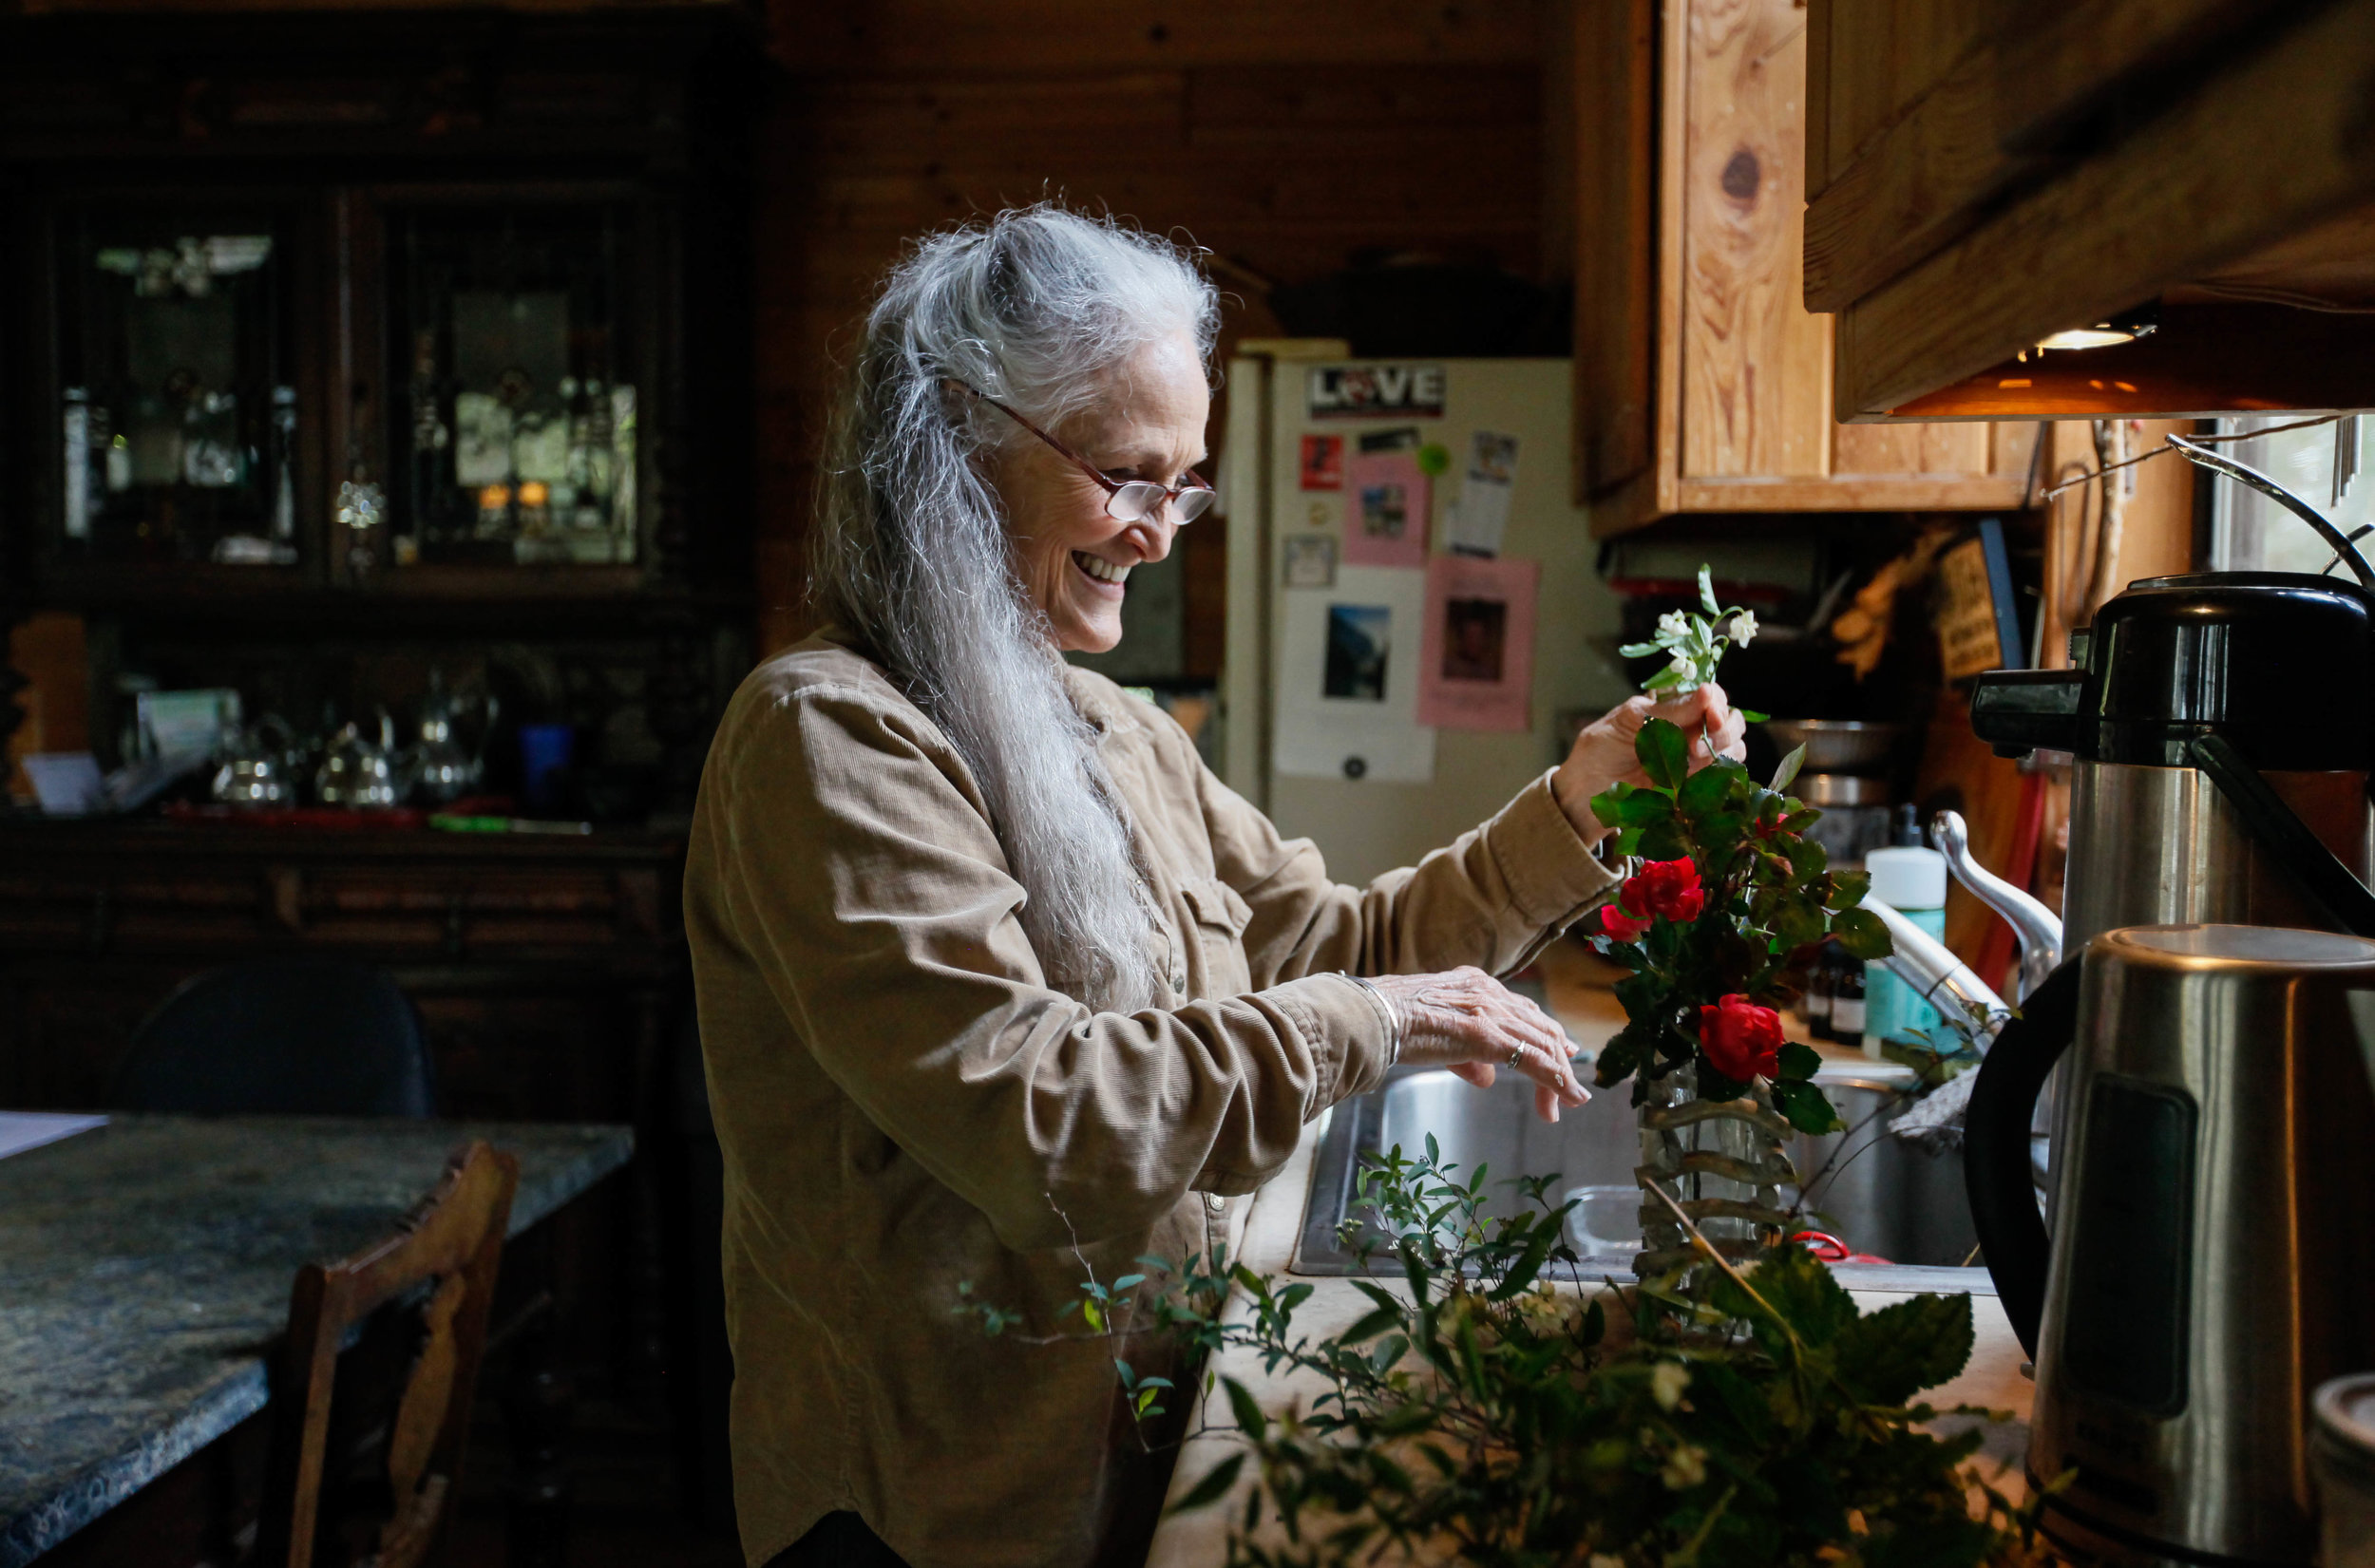  Tina Tinsley, 75, a psychotherapist and founder of Earthsong, places some freshly picked roses in a vase at her home in Earthsong on Saturday, April 7, 2018. 